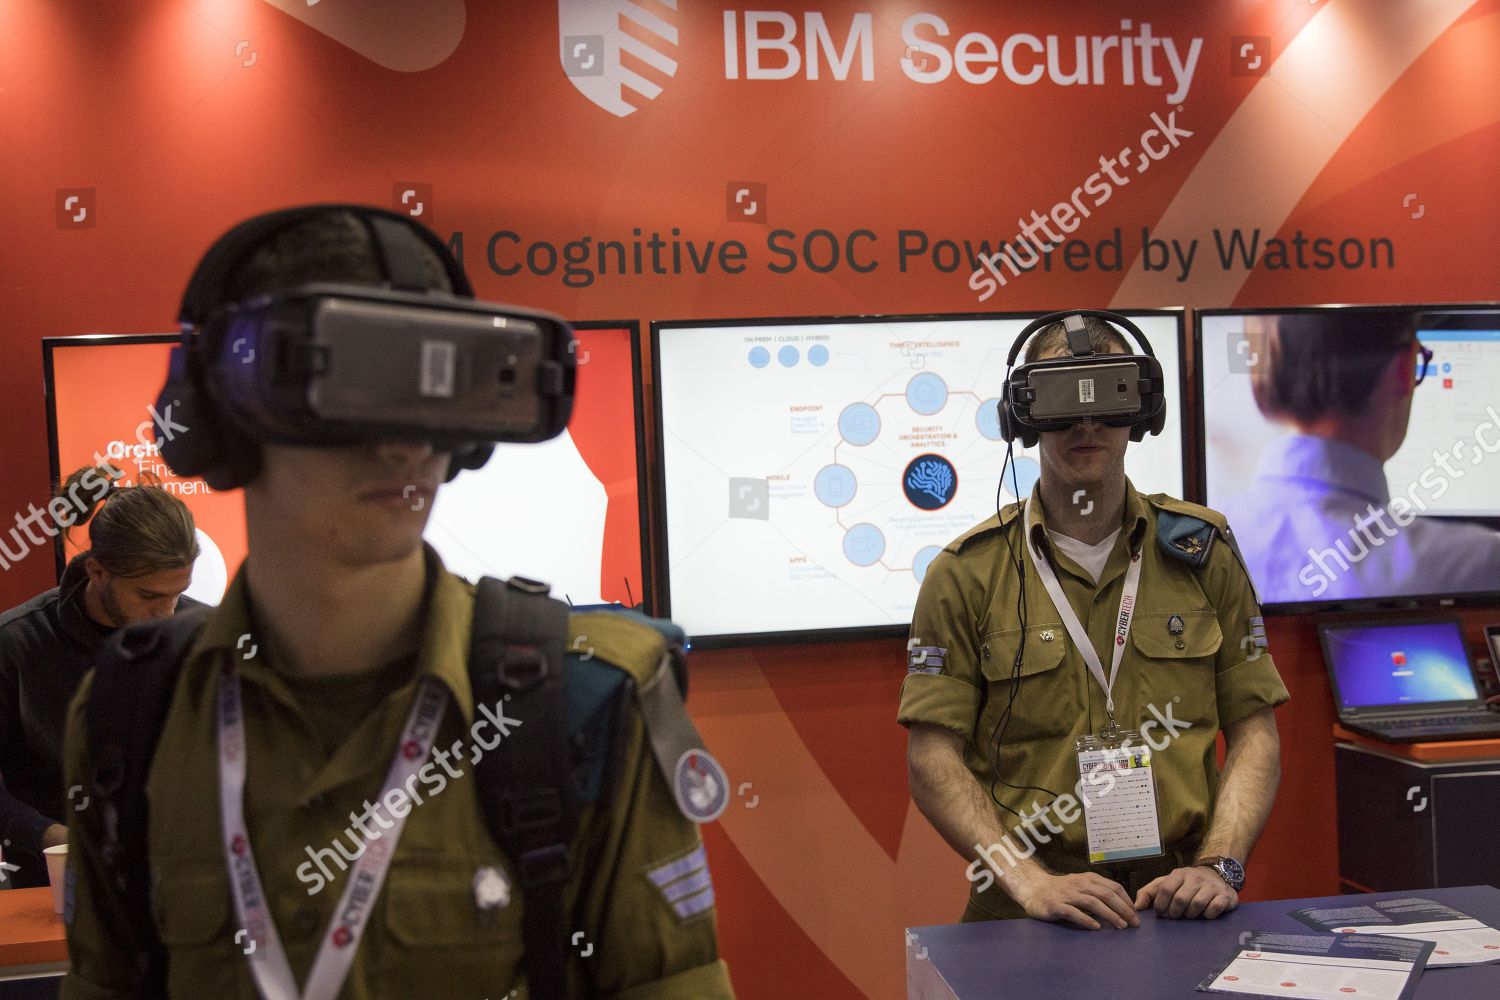 Israeli Soldiers Visiting Ibm Booth Use Vr Editorial Stock Photo Stock Image Shutterstock